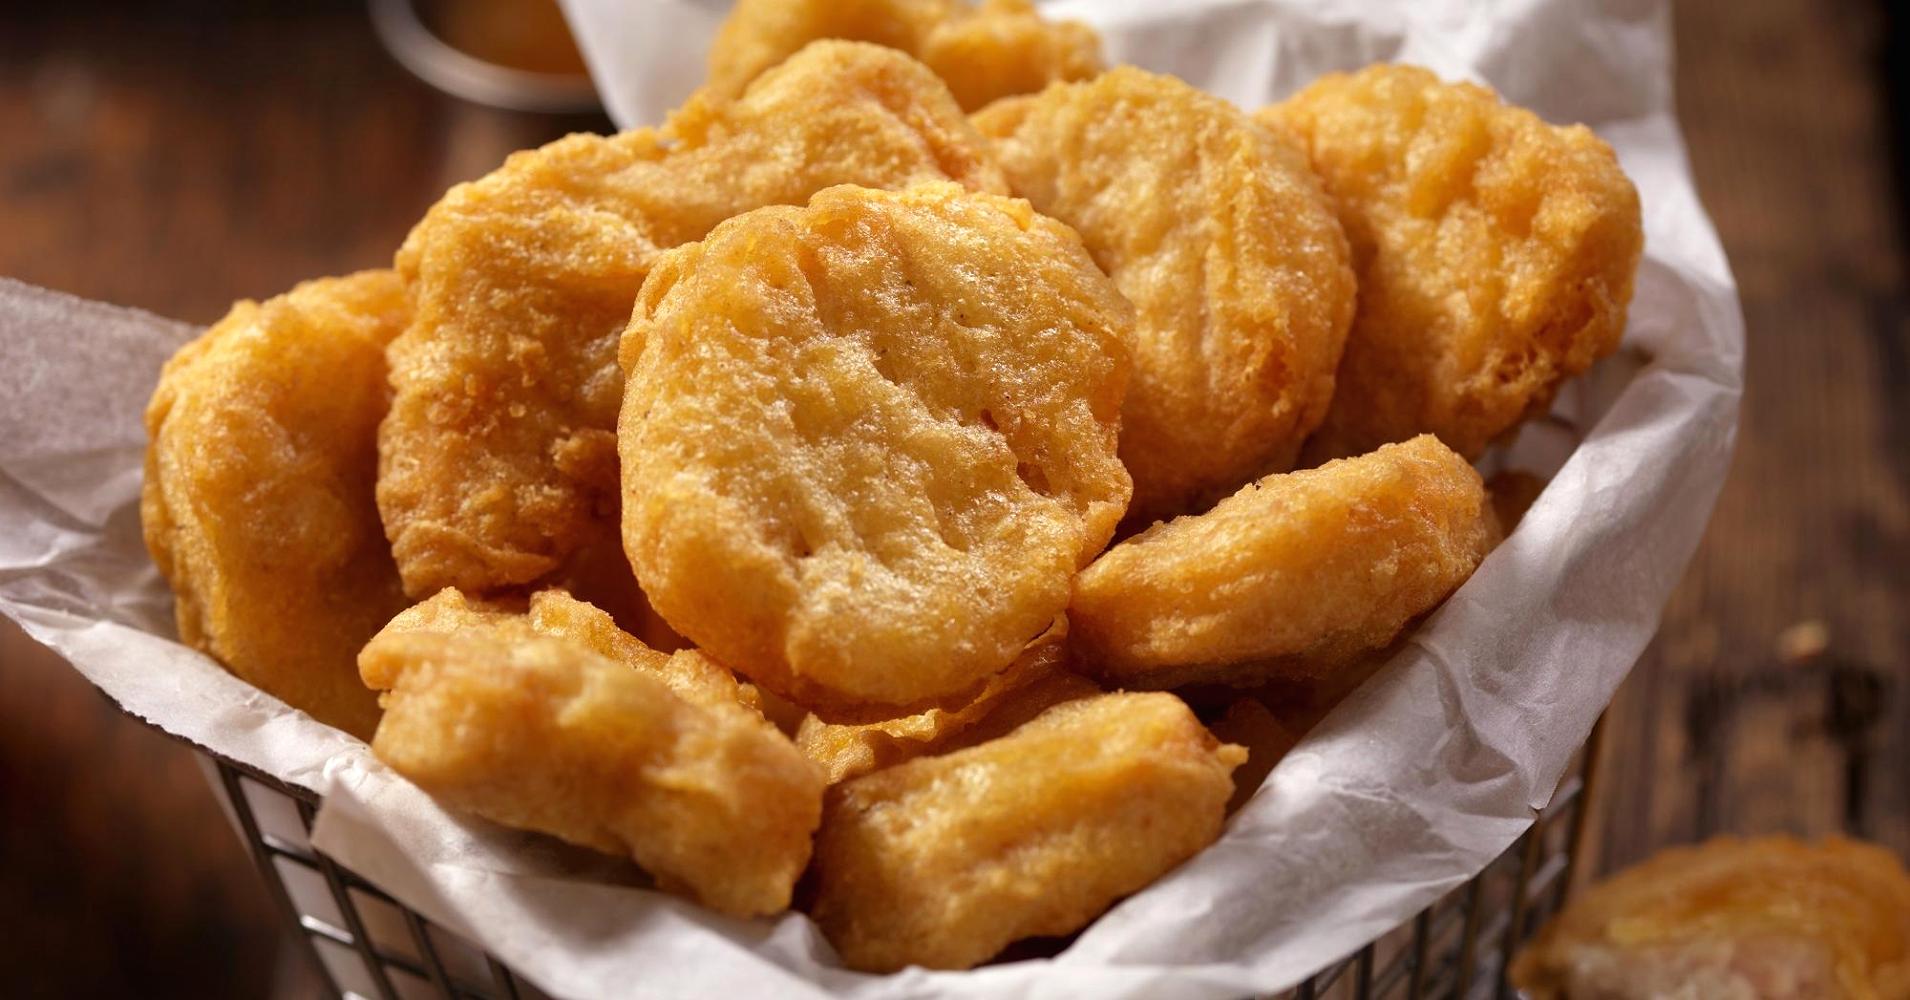 A New Study Has Linked Eating Chicken Nuggets To Cancer – Sick Chirpse